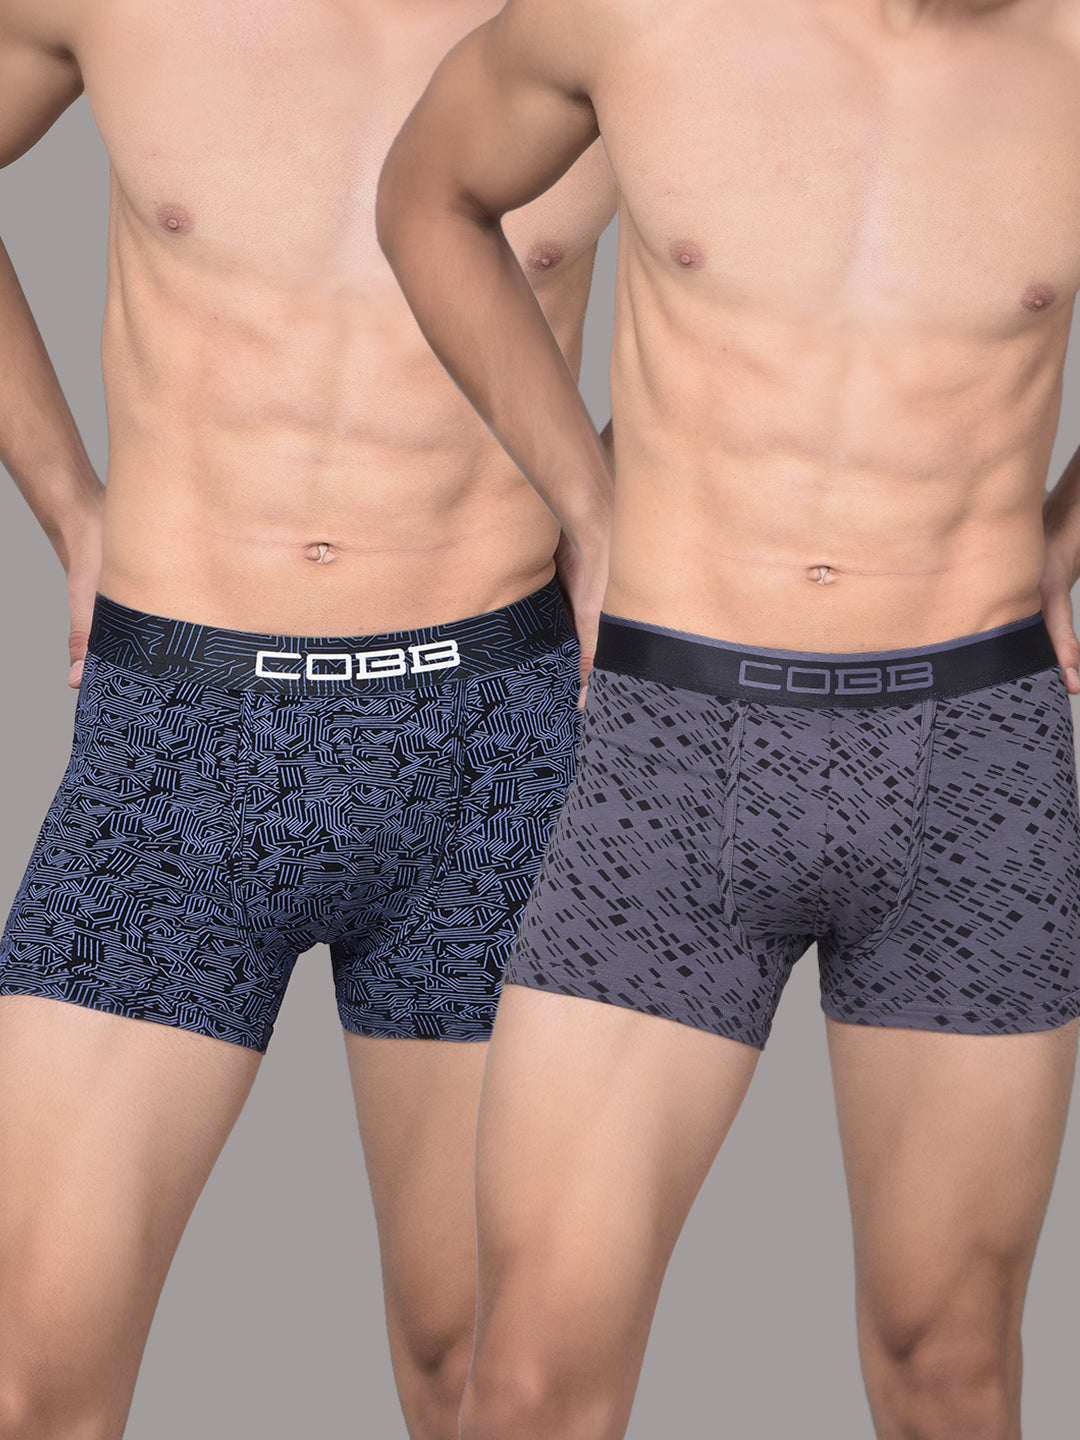 Cobb Mens Cotton Black and Blue Printed Premium Trunk (Pack of 2) Assorted